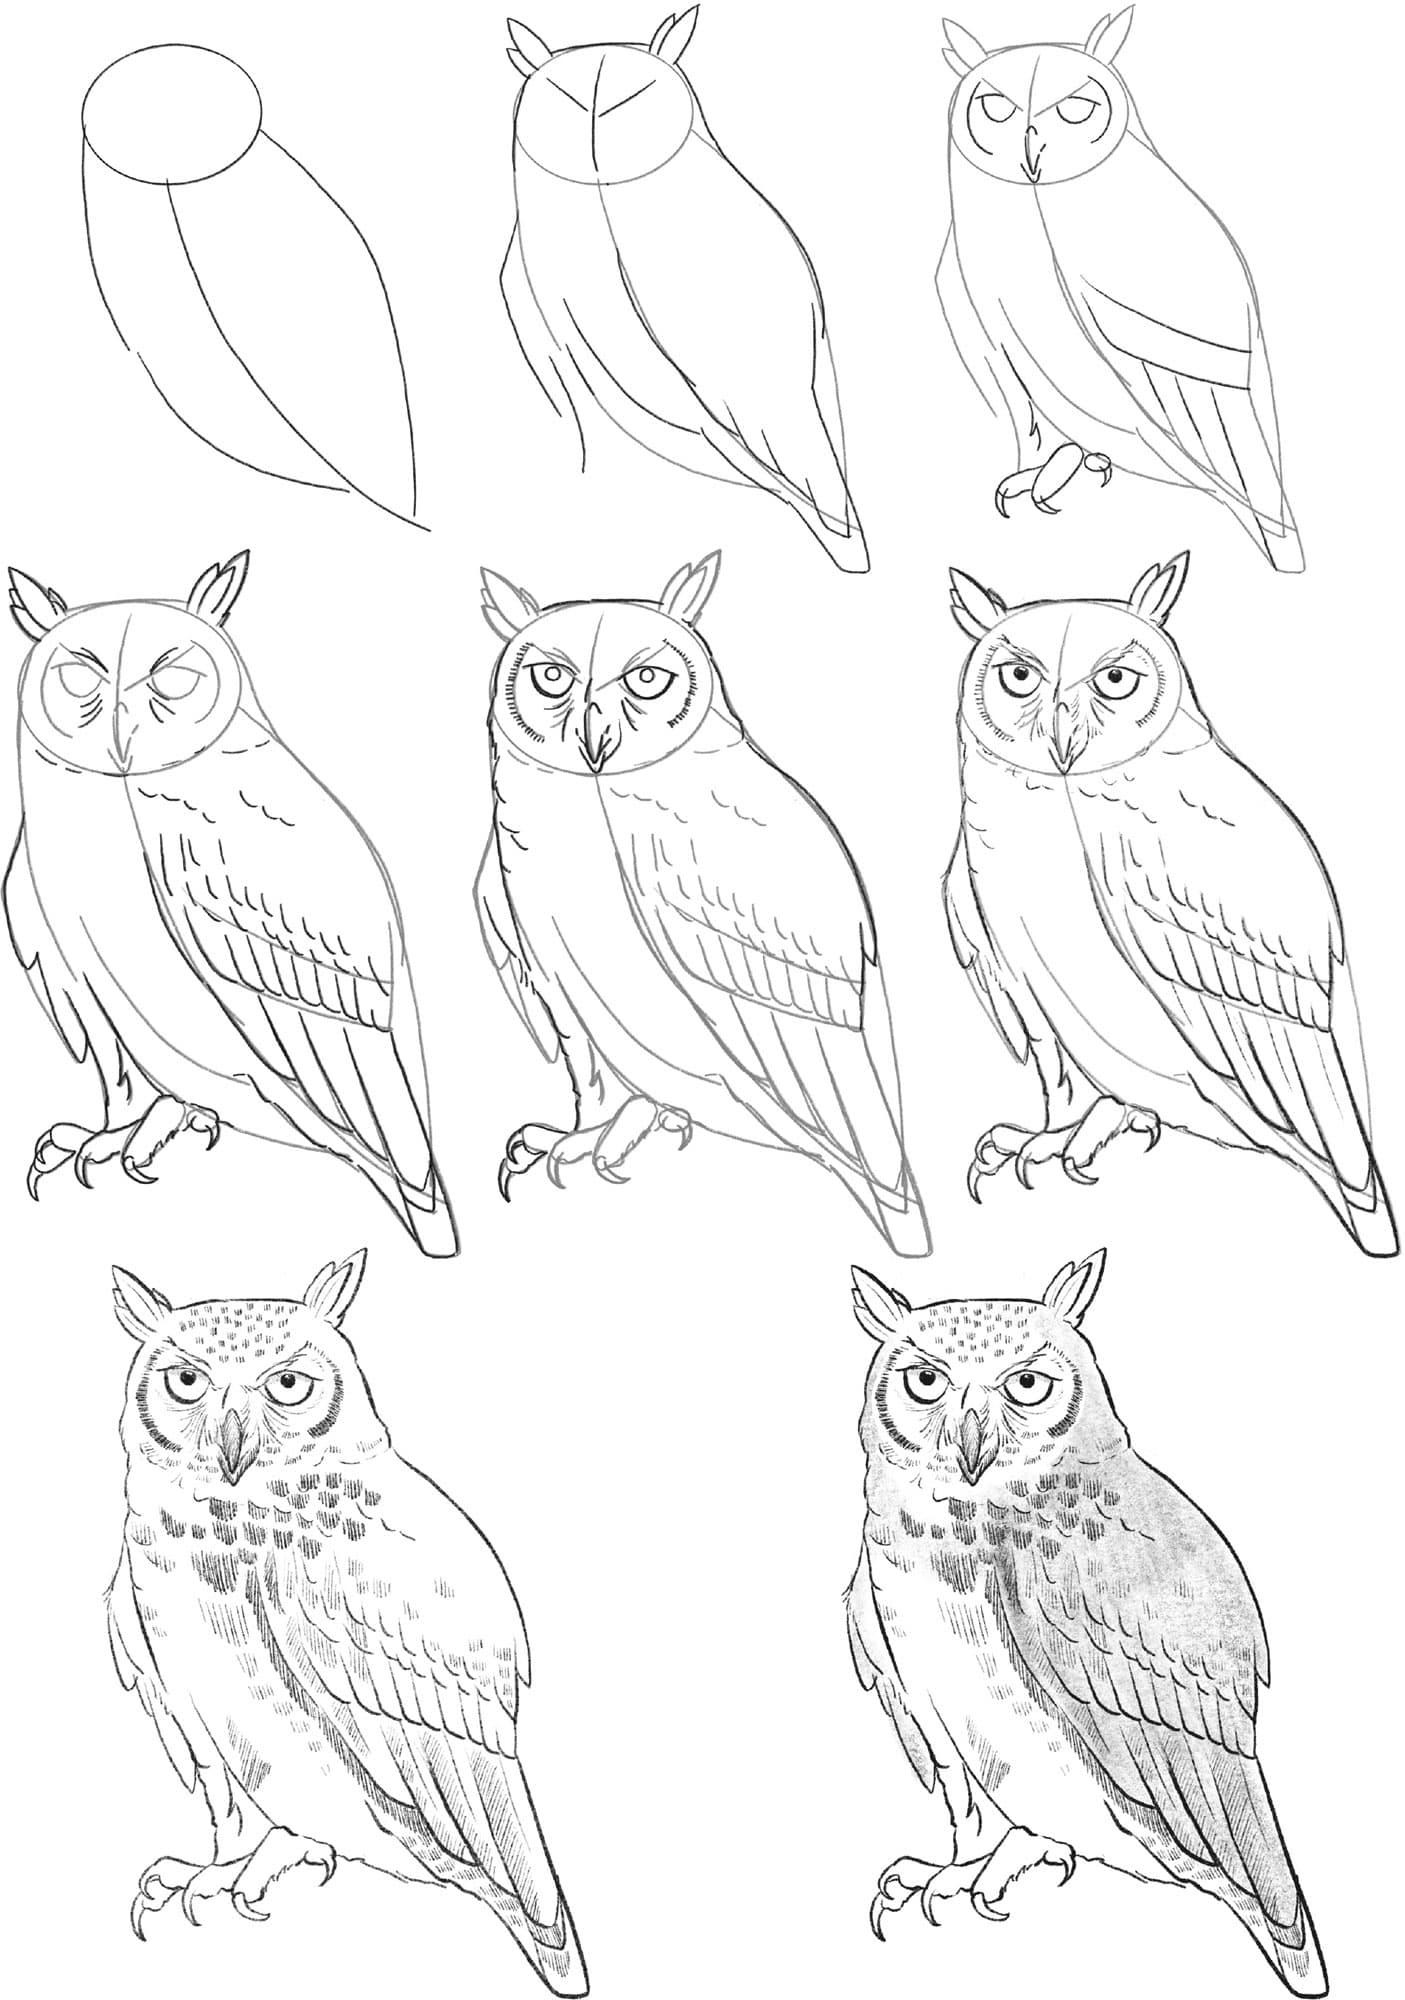 How to get started with sketching birds – Julia Bausenhardt